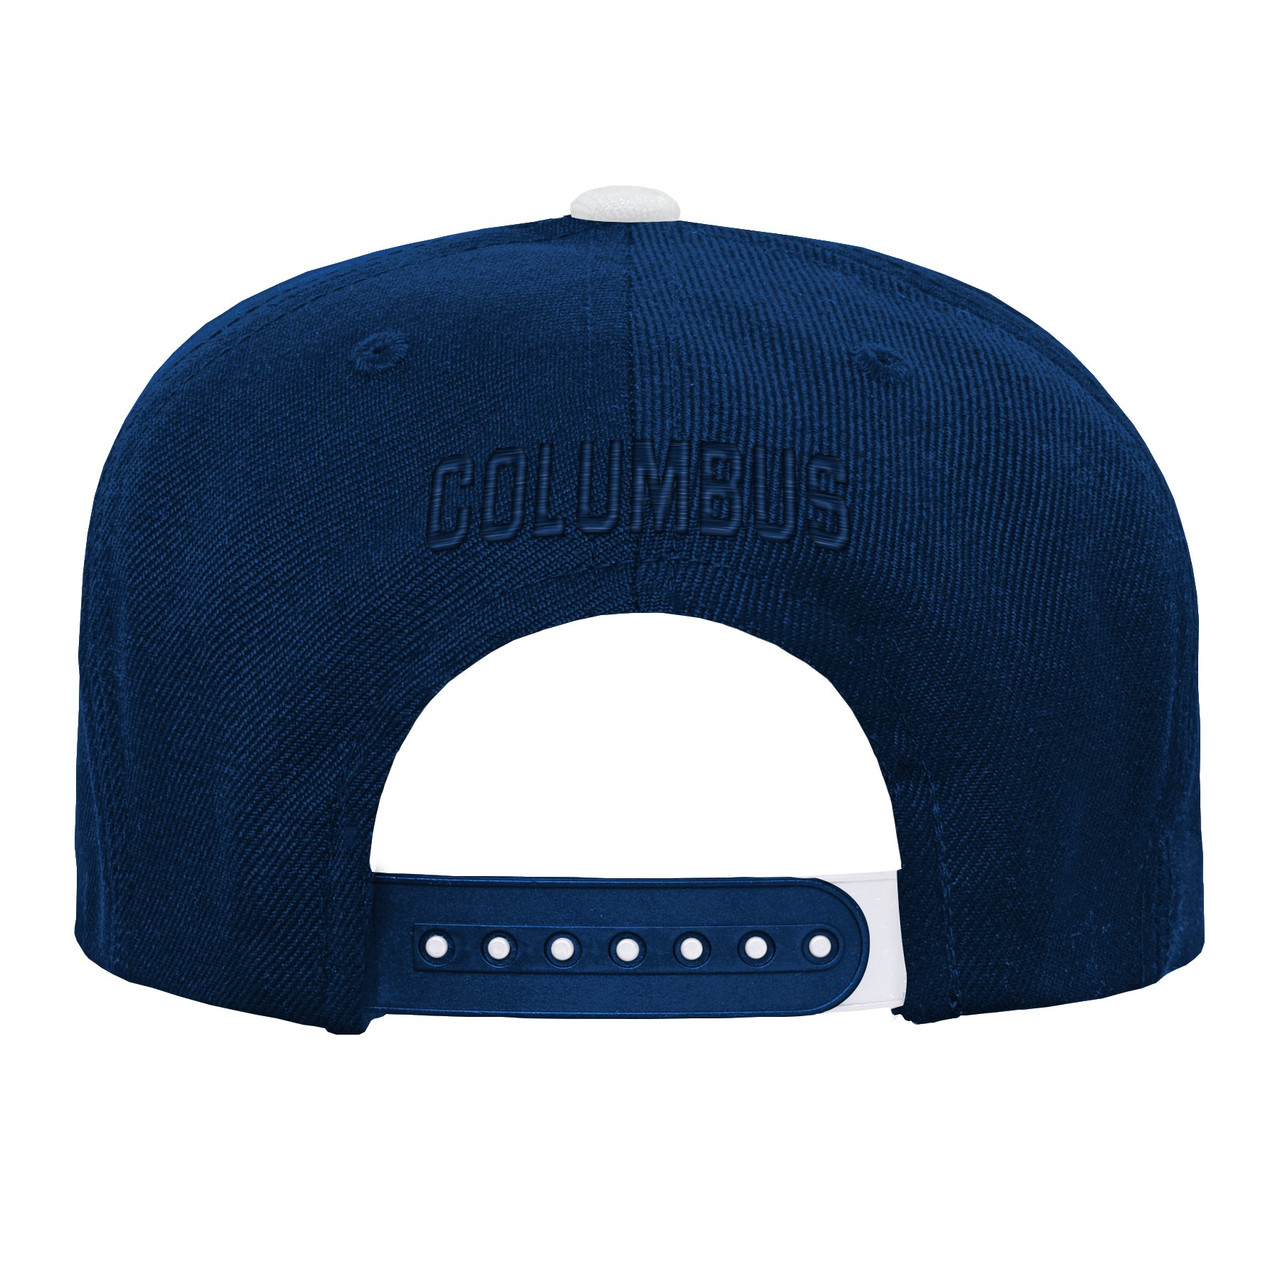 OUT Youth 3rd Jersey Precurved Snap Cap - Columbus Sportservice, LLC